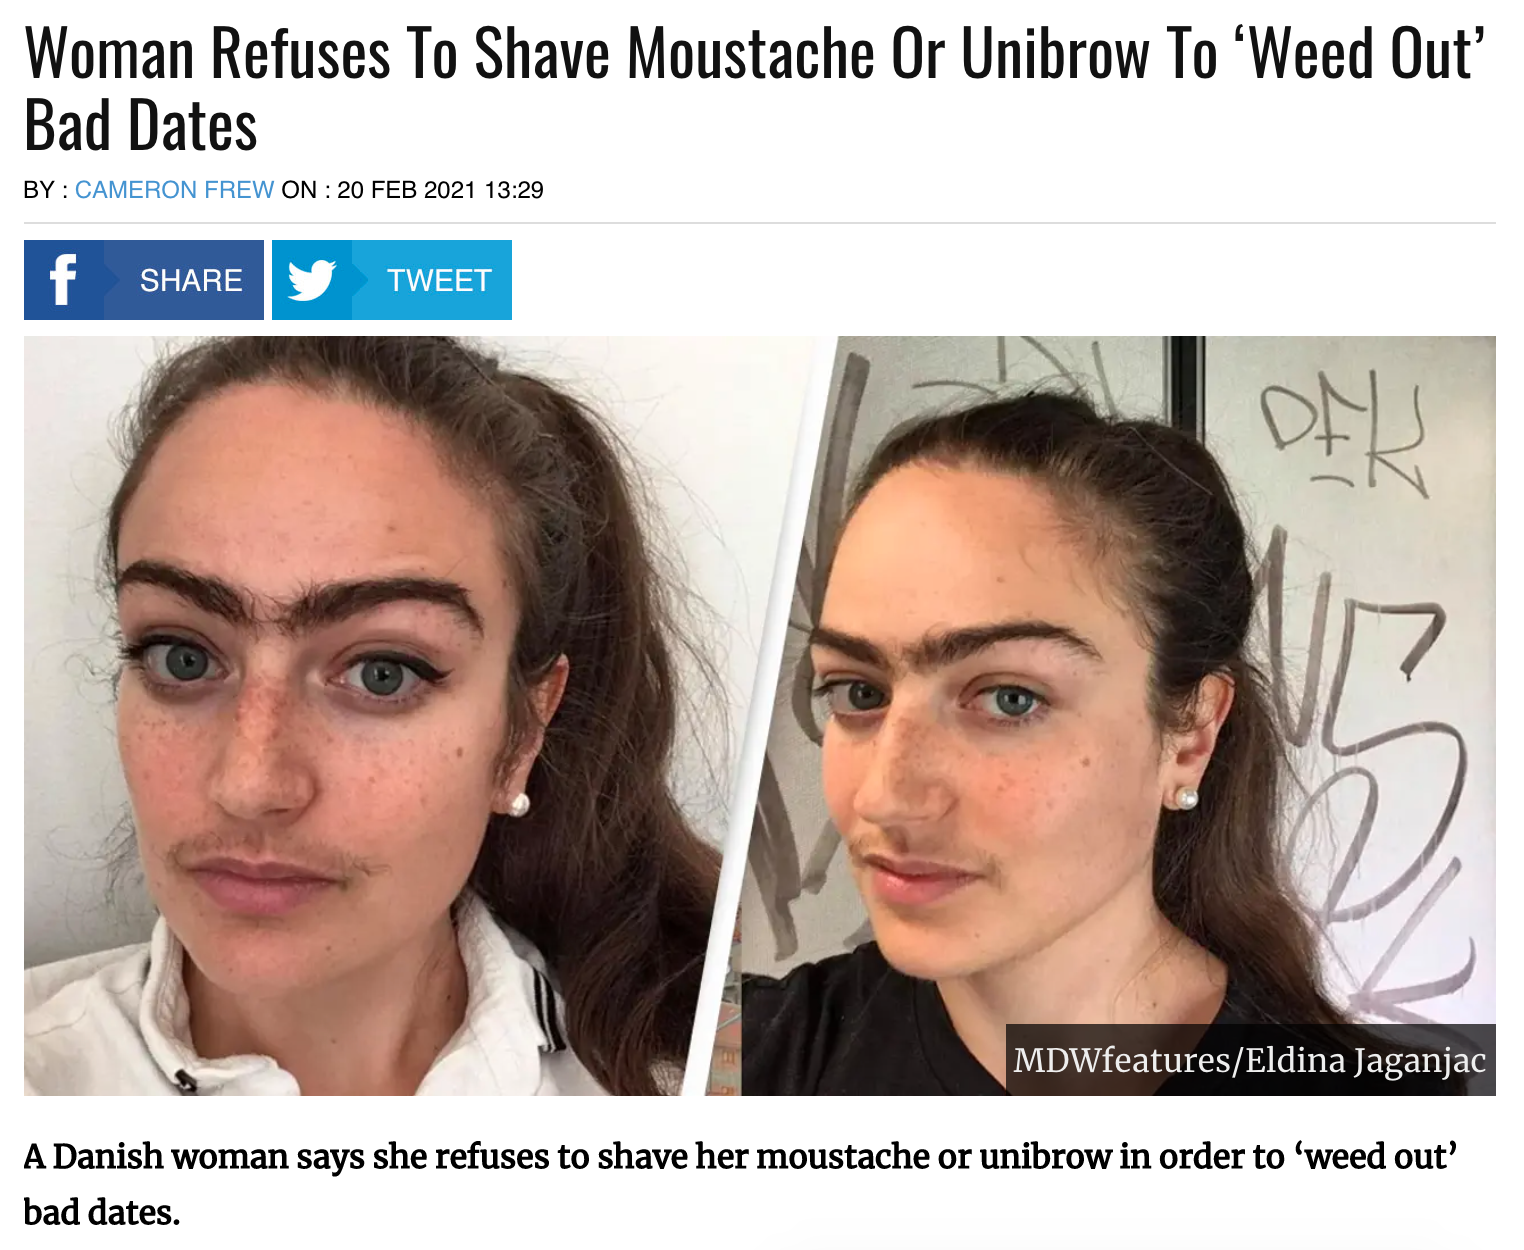 Eldina Jaganjac woman with unibrow and mustache - woman refuses to shave mustache or unibrow to weed out bad dates